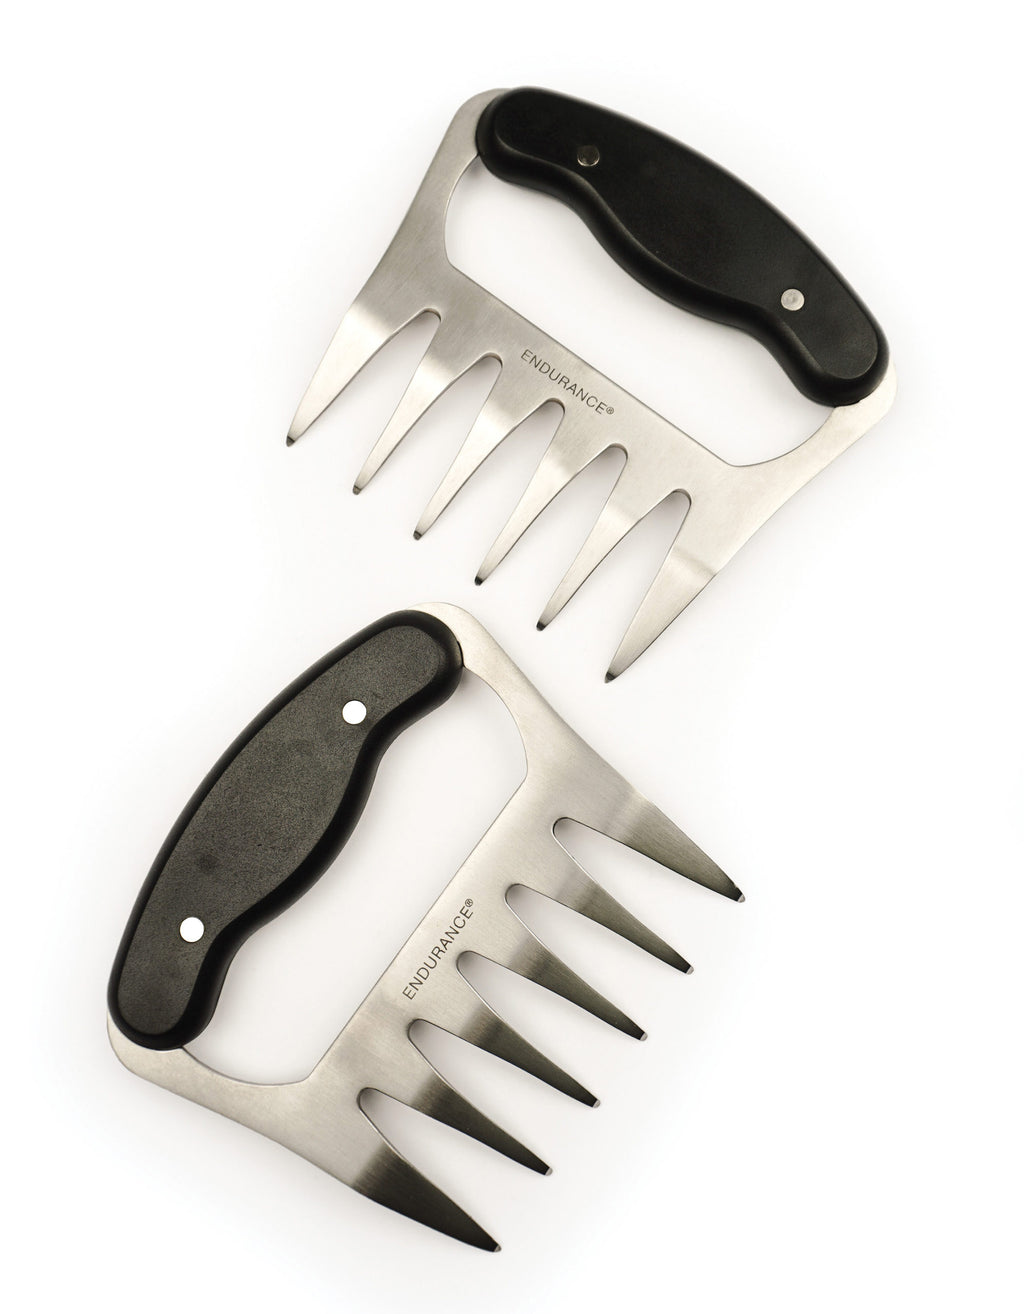 Stainless Meat Shredder Claws - Set of 2, Cooking and Baking